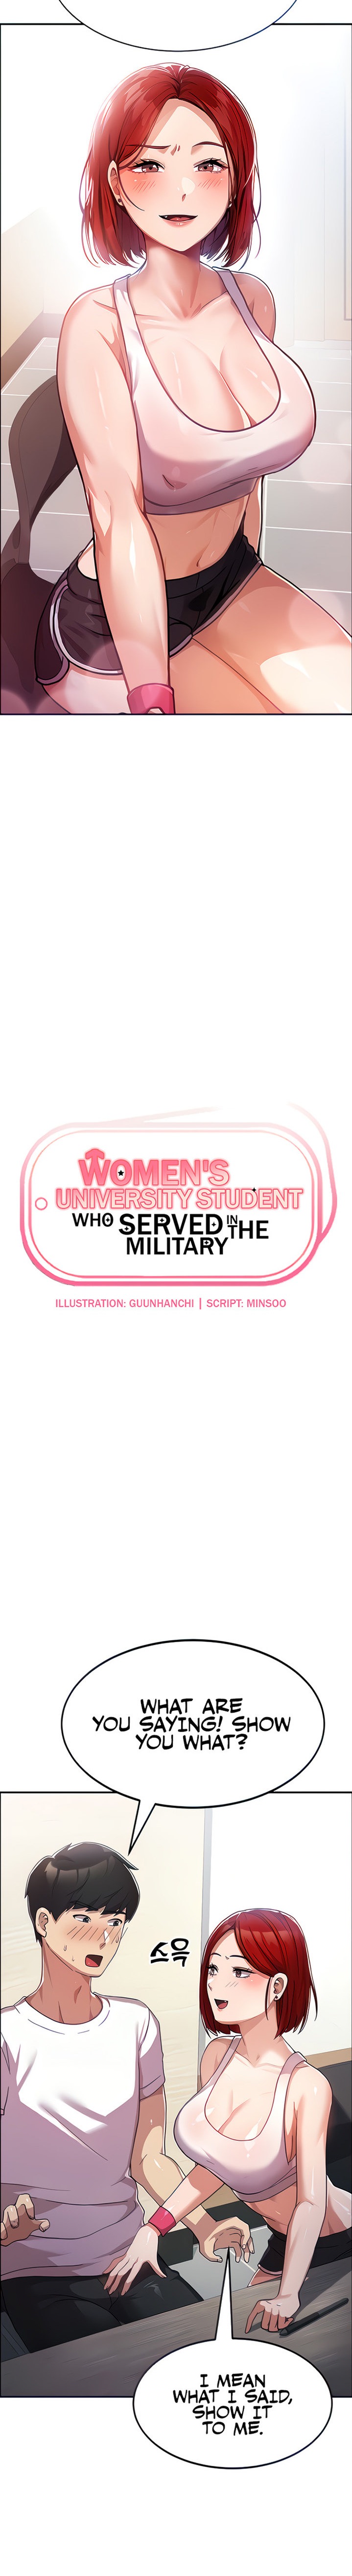 Women’s University Student who Served in the Military - Chapter 2 Page 2